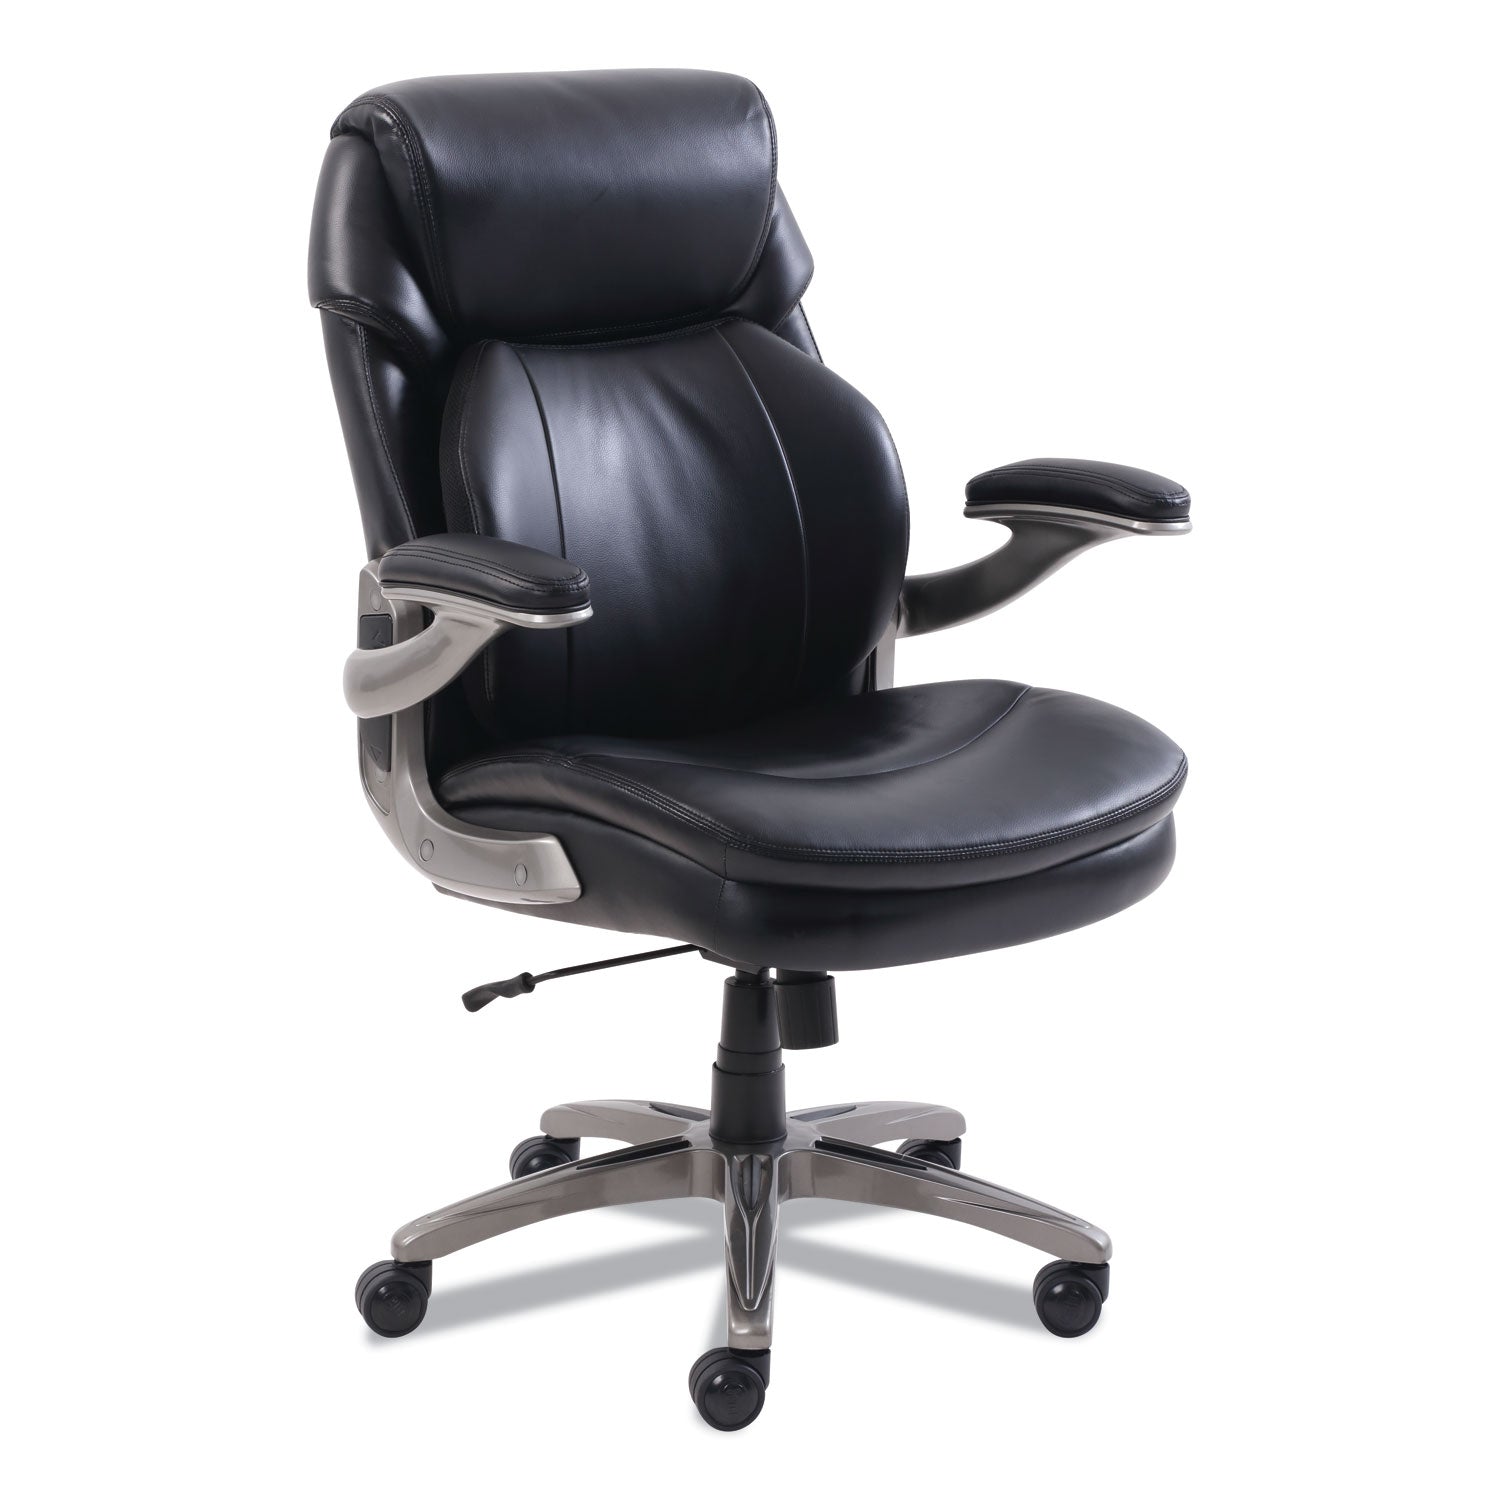 cosset-mid-back-executive-chair-supports-up-to-275-lb-185-to-215-seat-height-black-seat-back-slate-base_srj48966 - 1